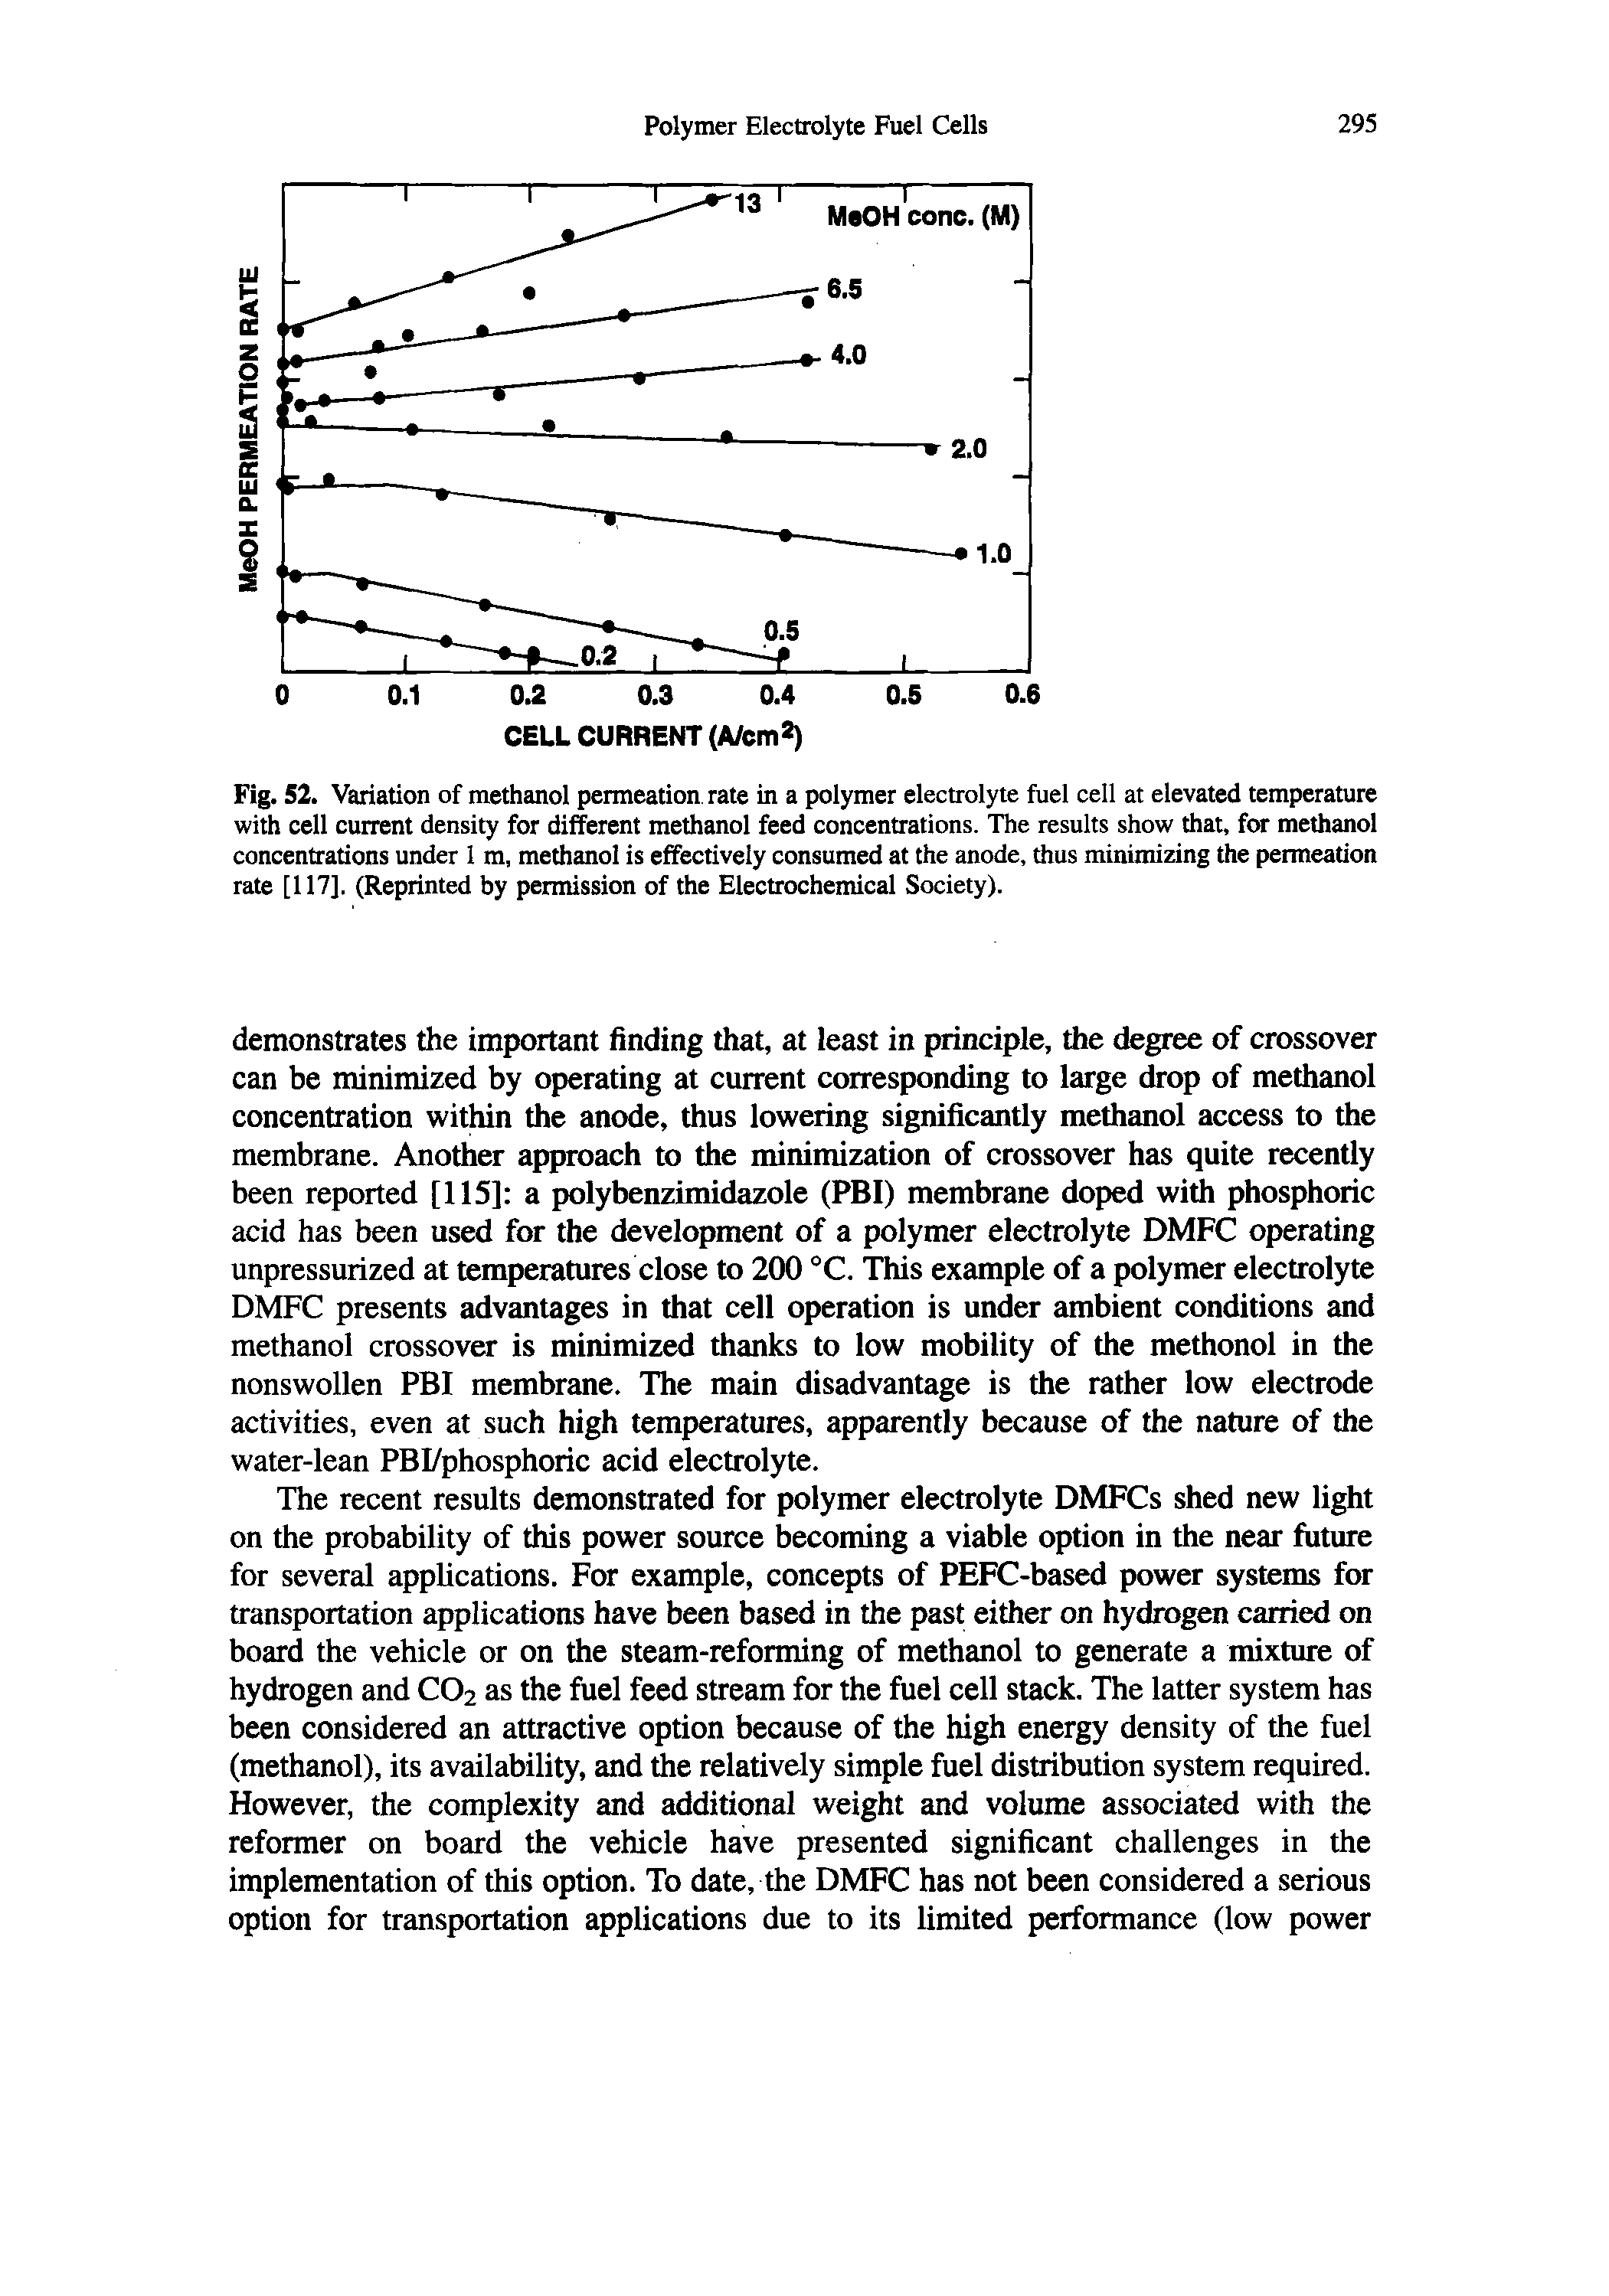 Fig. 52. Variation of methanol permeation rate in a polymer electrolyte fuel cell at elevated temperature with cell current density for different methanol feed concentrations. The results show that, for methanol concentrations under 1 m, methanol is effectively consumed at the anode, thus minimizing the permeation rate [117], (Reprinted by permission of the Electrochemical Society).